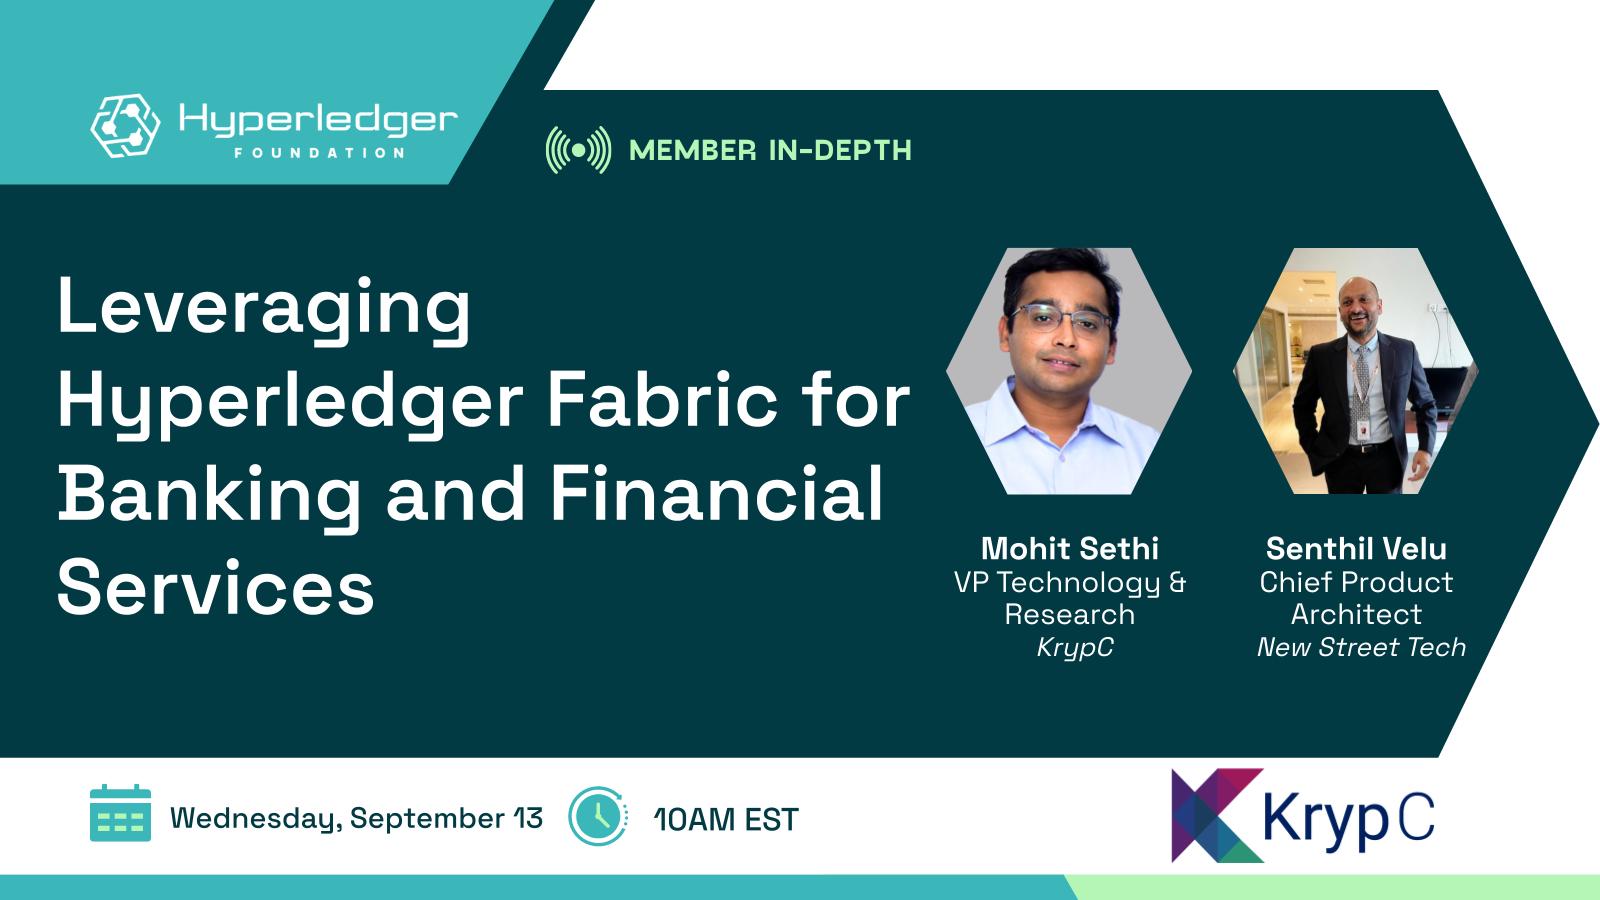 Hyperledger In-depth with KrypC: Leveraging Hyperledger Fabric for Banking and Financial Services